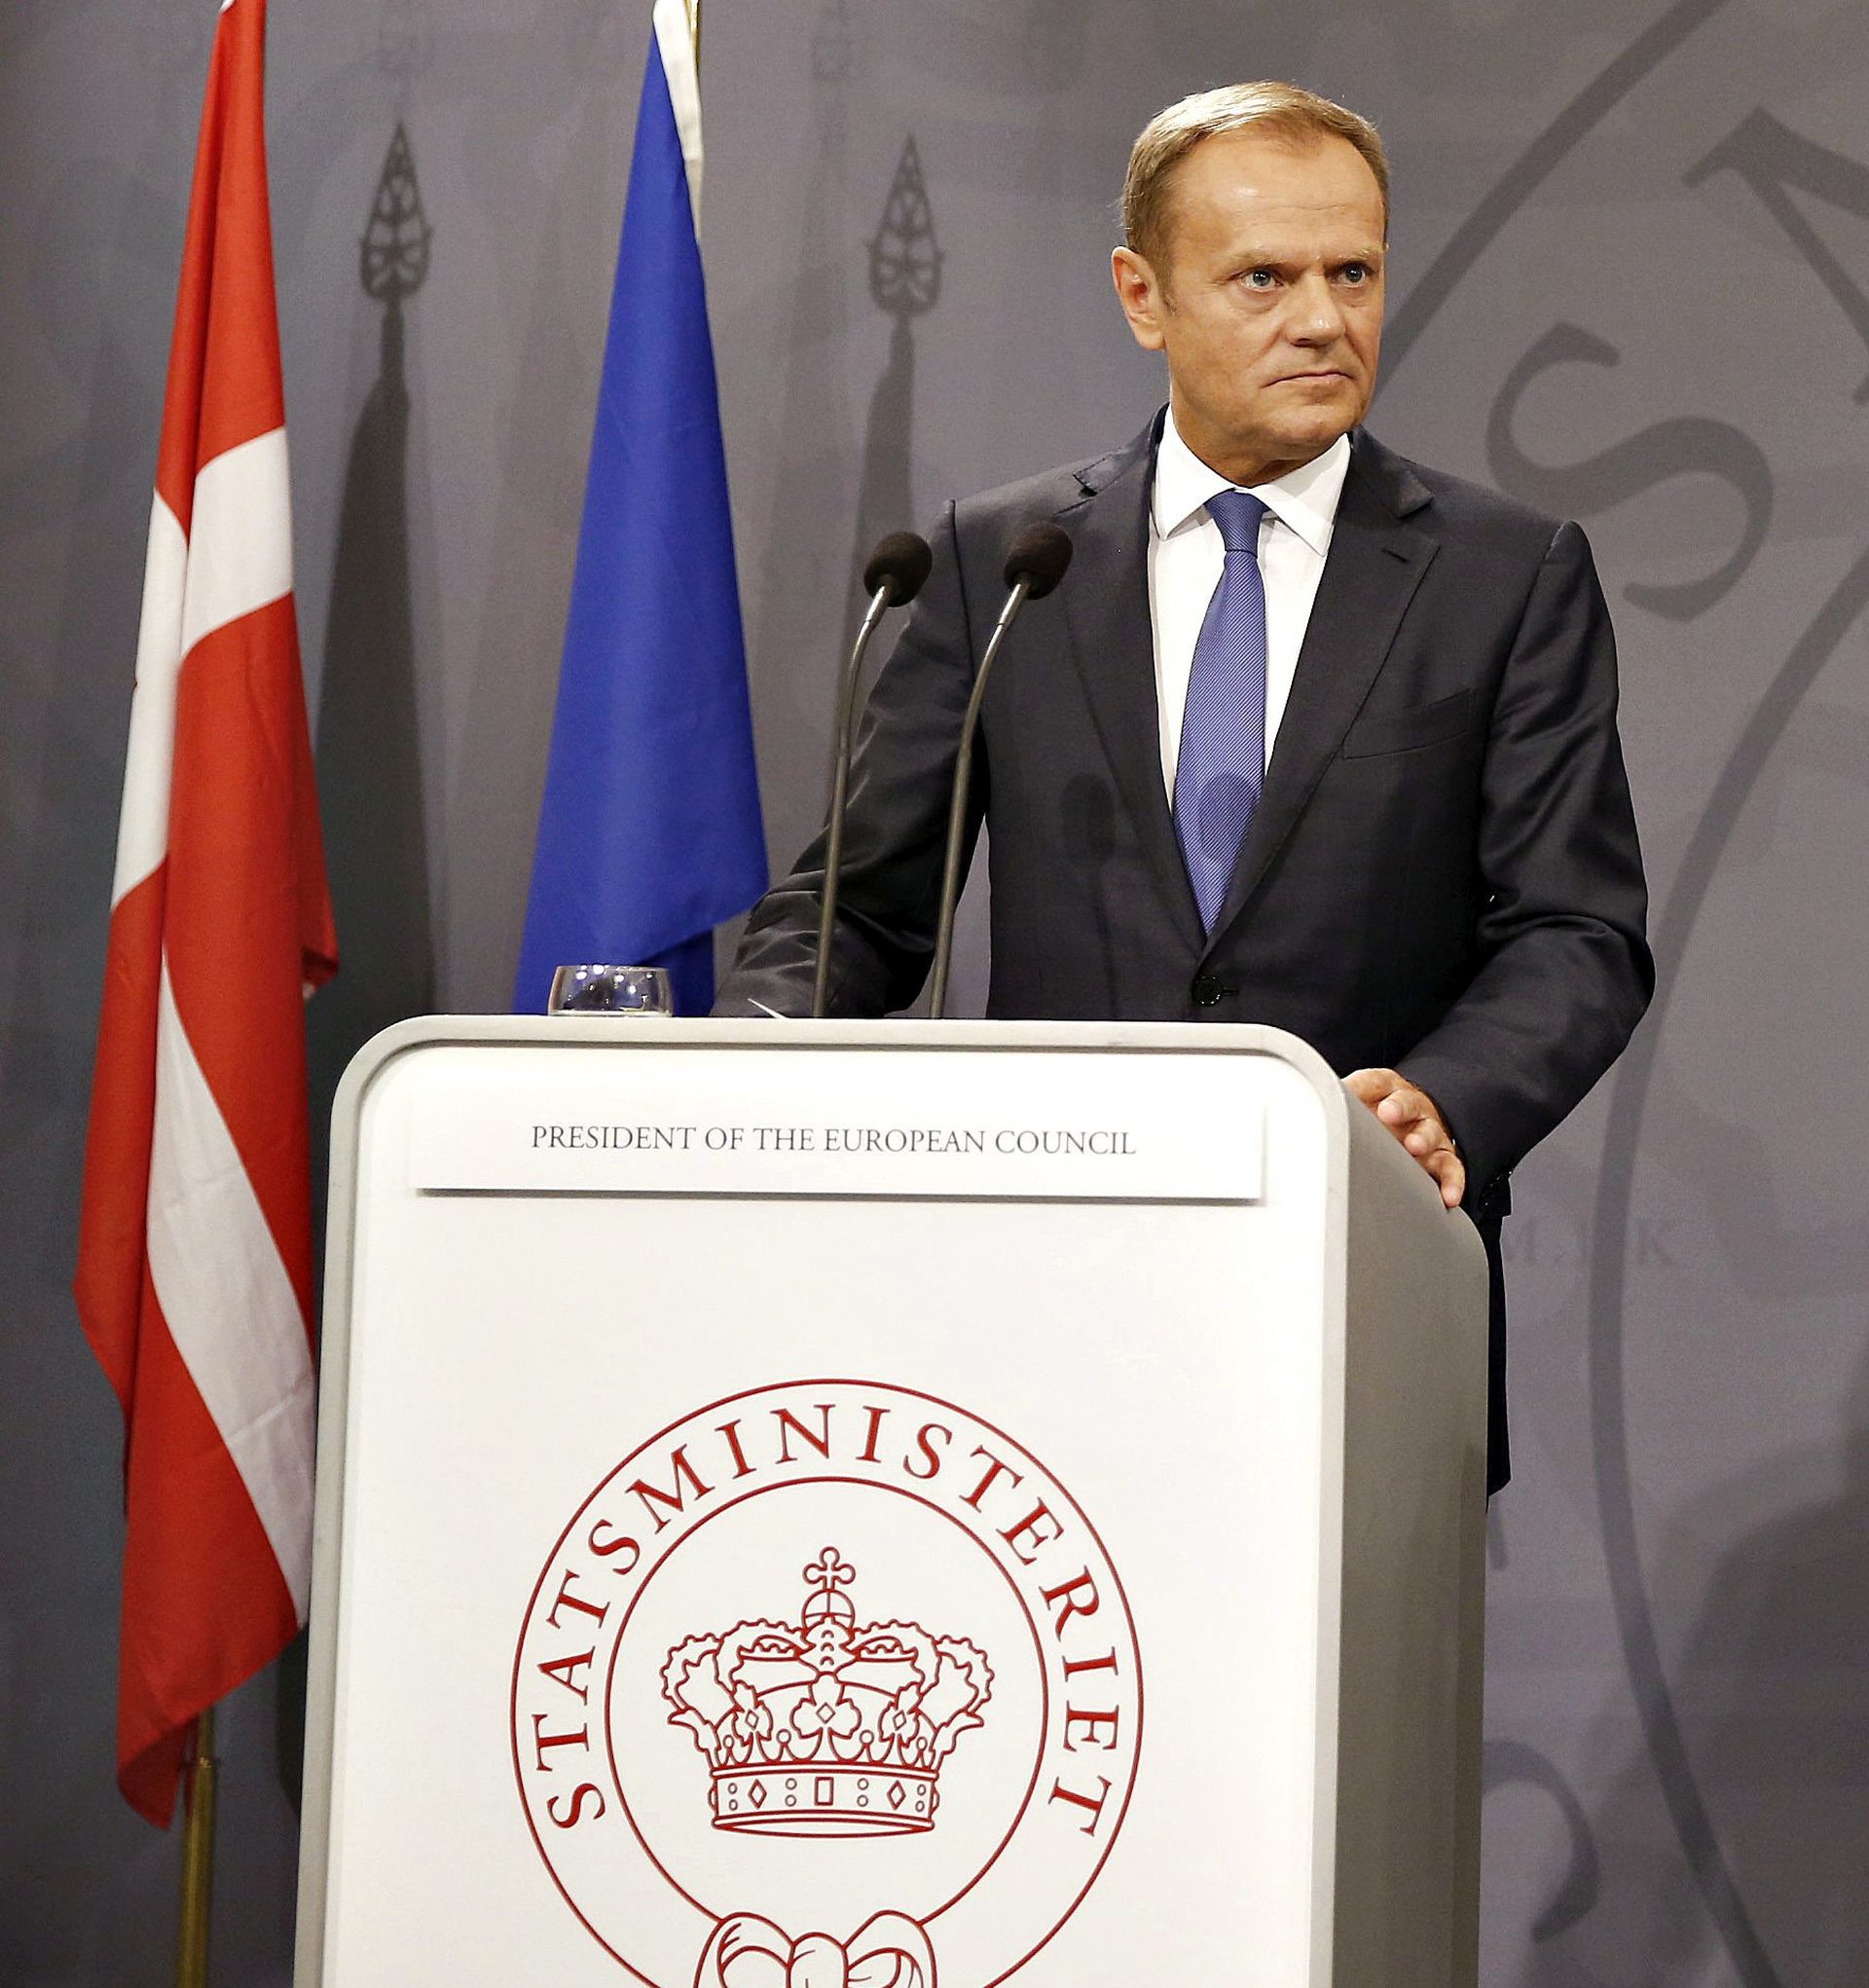 epa05311600 President of the European Council, Donald Tusk (L) adresses the media during a press meeting together with Danish Prime Minister Lars Lokke Rasmussen (R) at the Prime Ministers office in Copenhagen, Denmark, 17 May 2016. Mr Tusk and Mr Lokke Rasmussen will among other things discuss the handling of the challenges which Europe is facing right now.  EPA/NIKOLAI LINARES DENMARK OUT